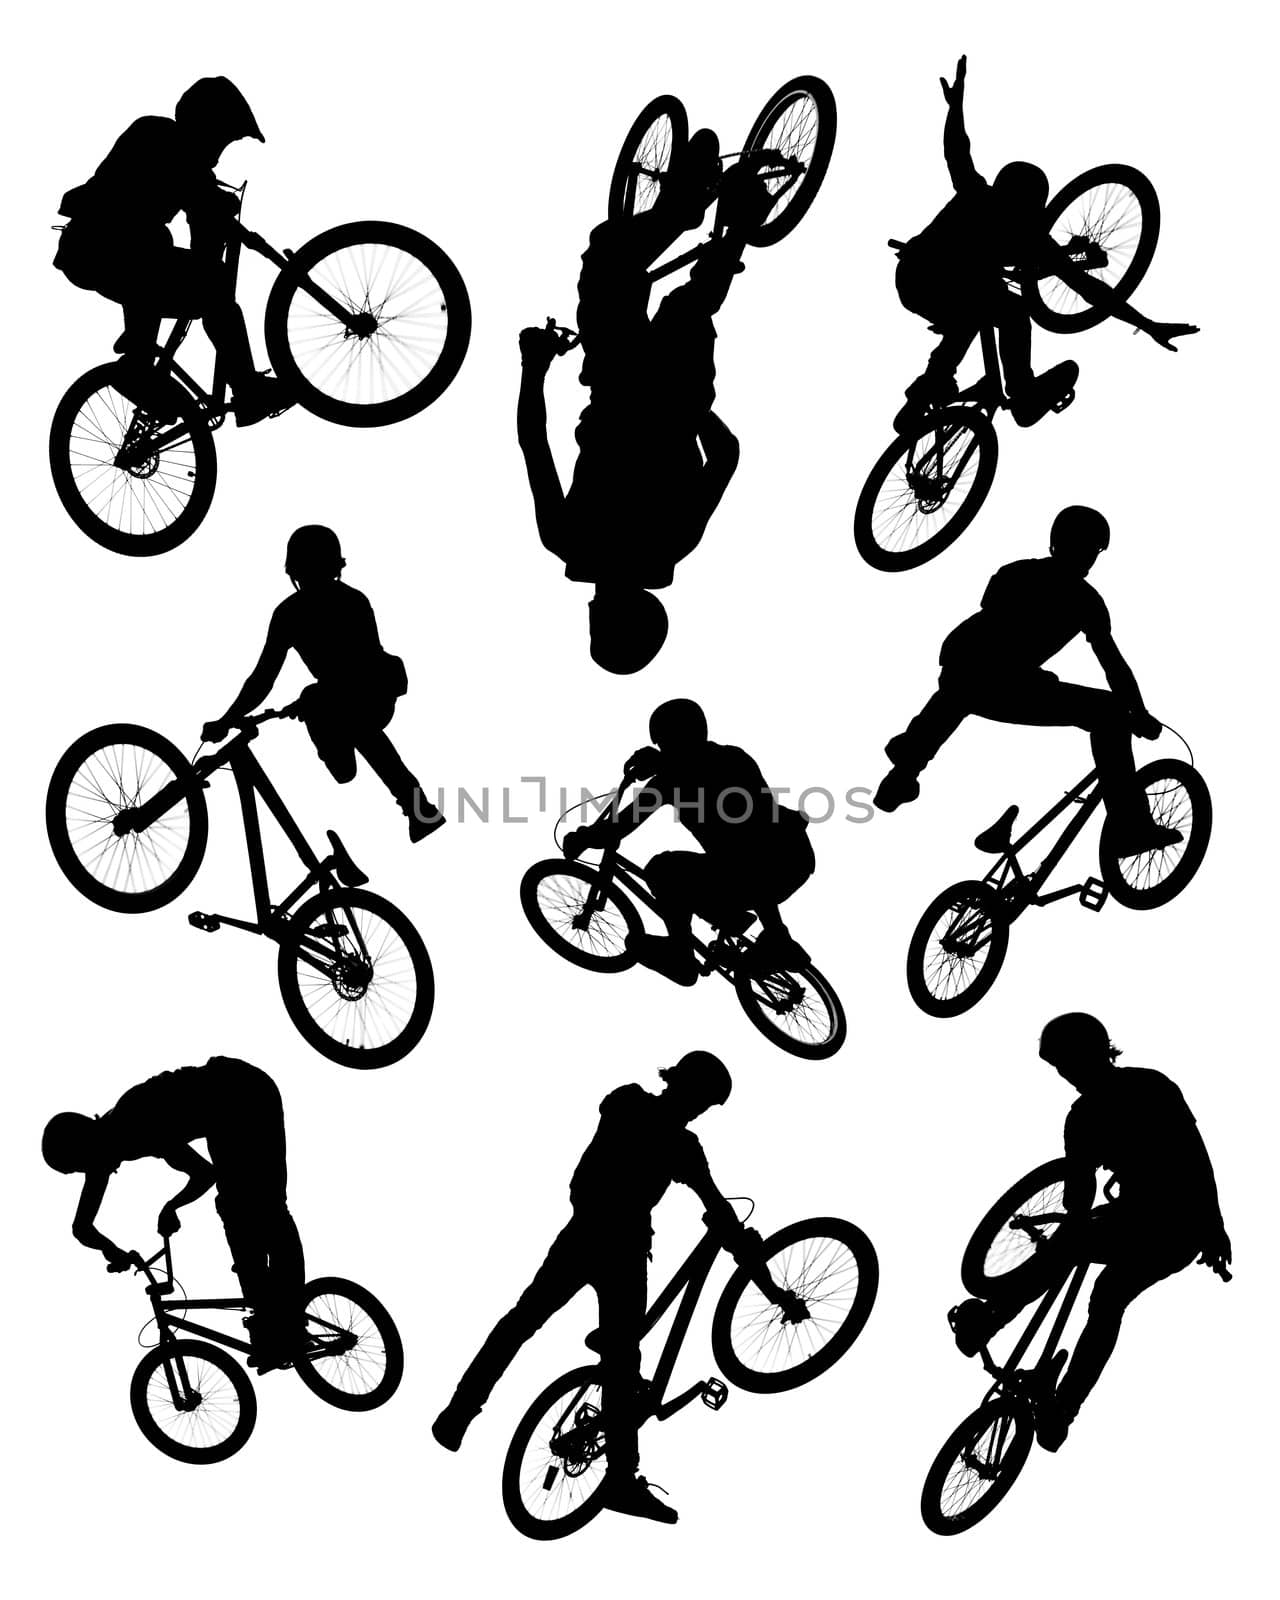 Series of silhouette photographs of bikers doing stunts.  Some motion blur is visible on the wheels and spokes.
